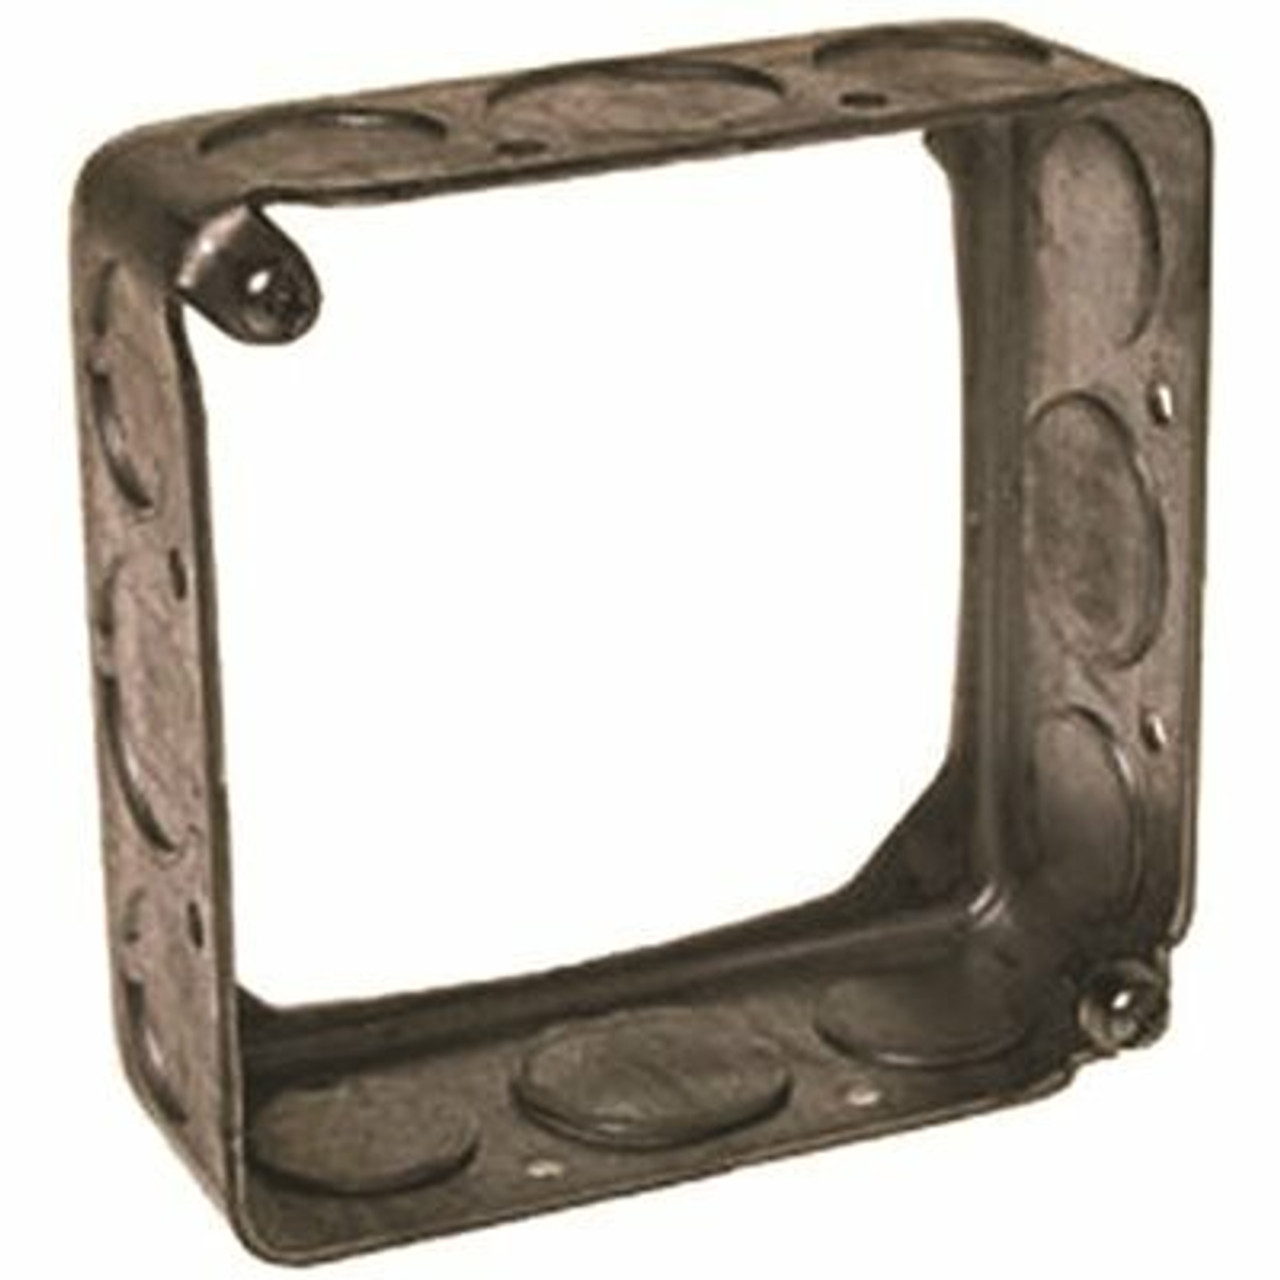 Raco 4 In. Square Extension Ring With Eight 1/2 In. And Four 3/4 In. Ko's